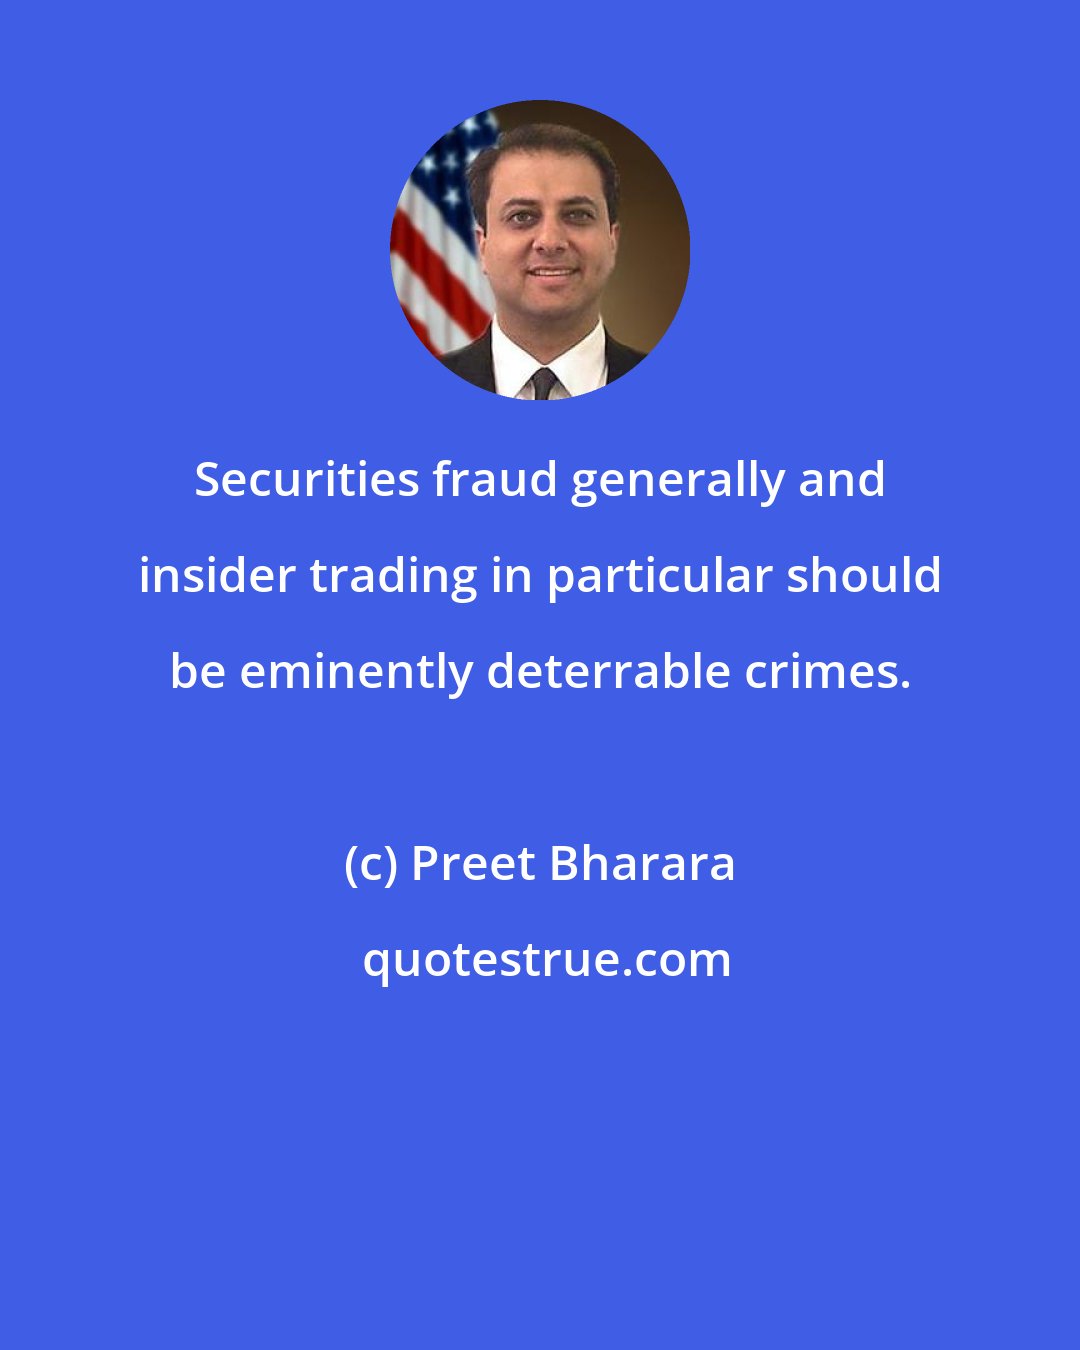 Preet Bharara: Securities fraud generally and insider trading in particular should be eminently deterrable crimes.